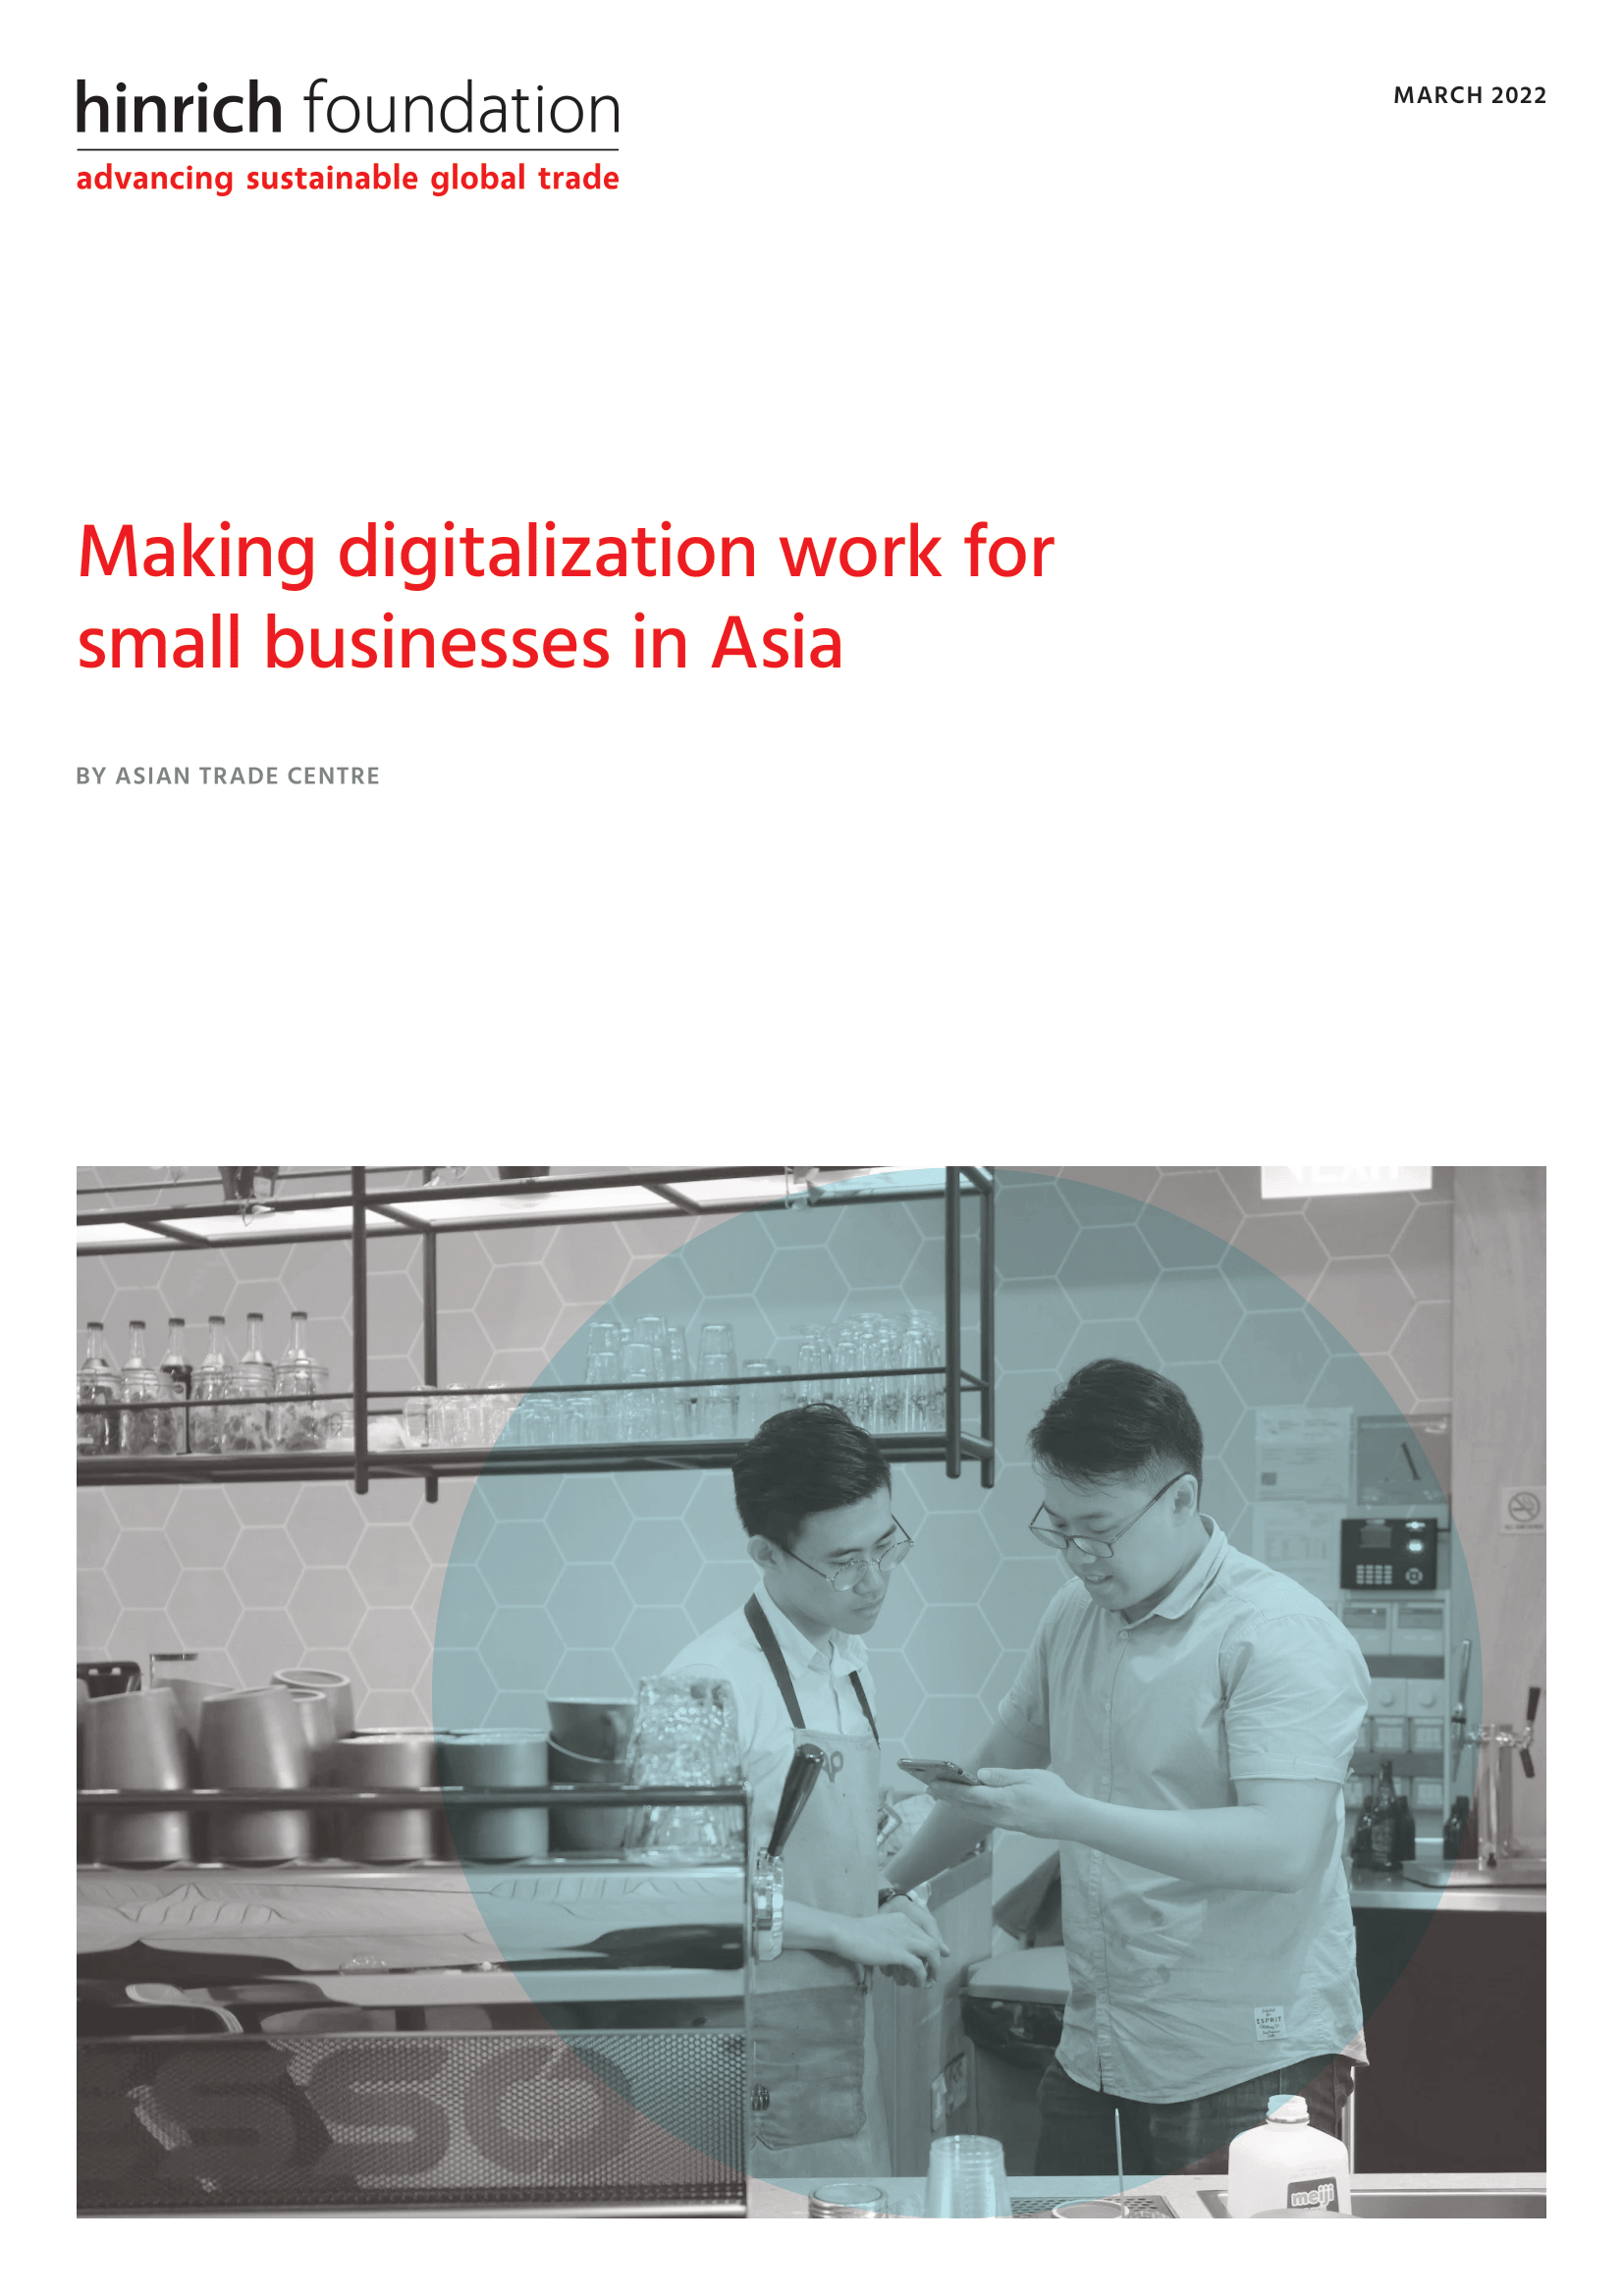 Making digitalization work for MSMEs in Asia - Hinrich Foundation - Asian Trade Centre - March 2022-01.png